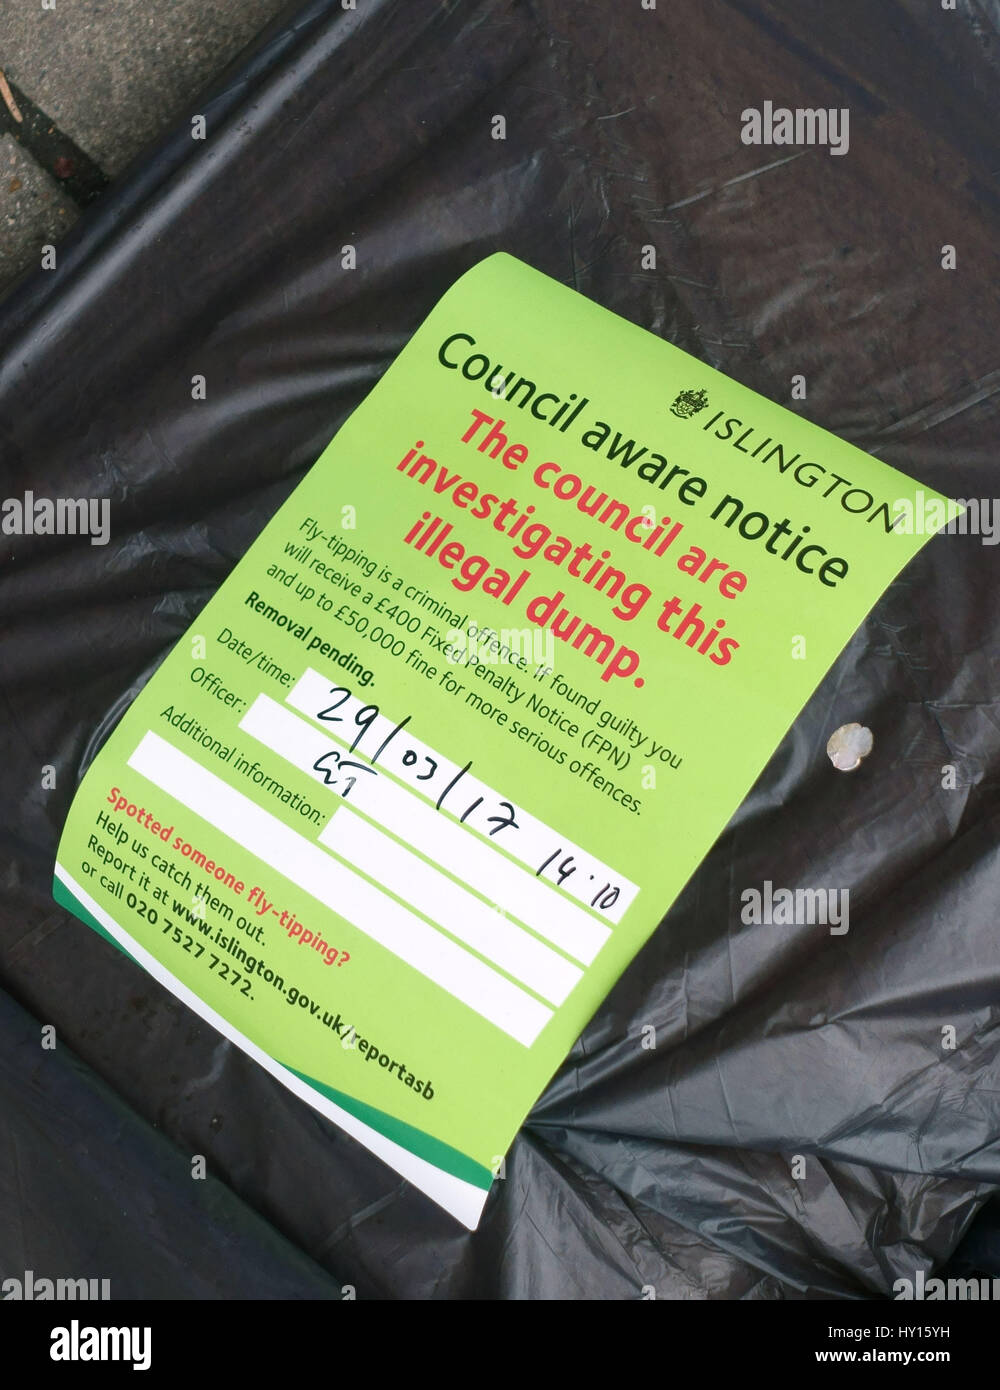 Council notice on fly-tipped rubbish bag in Islington, London Stock Photo